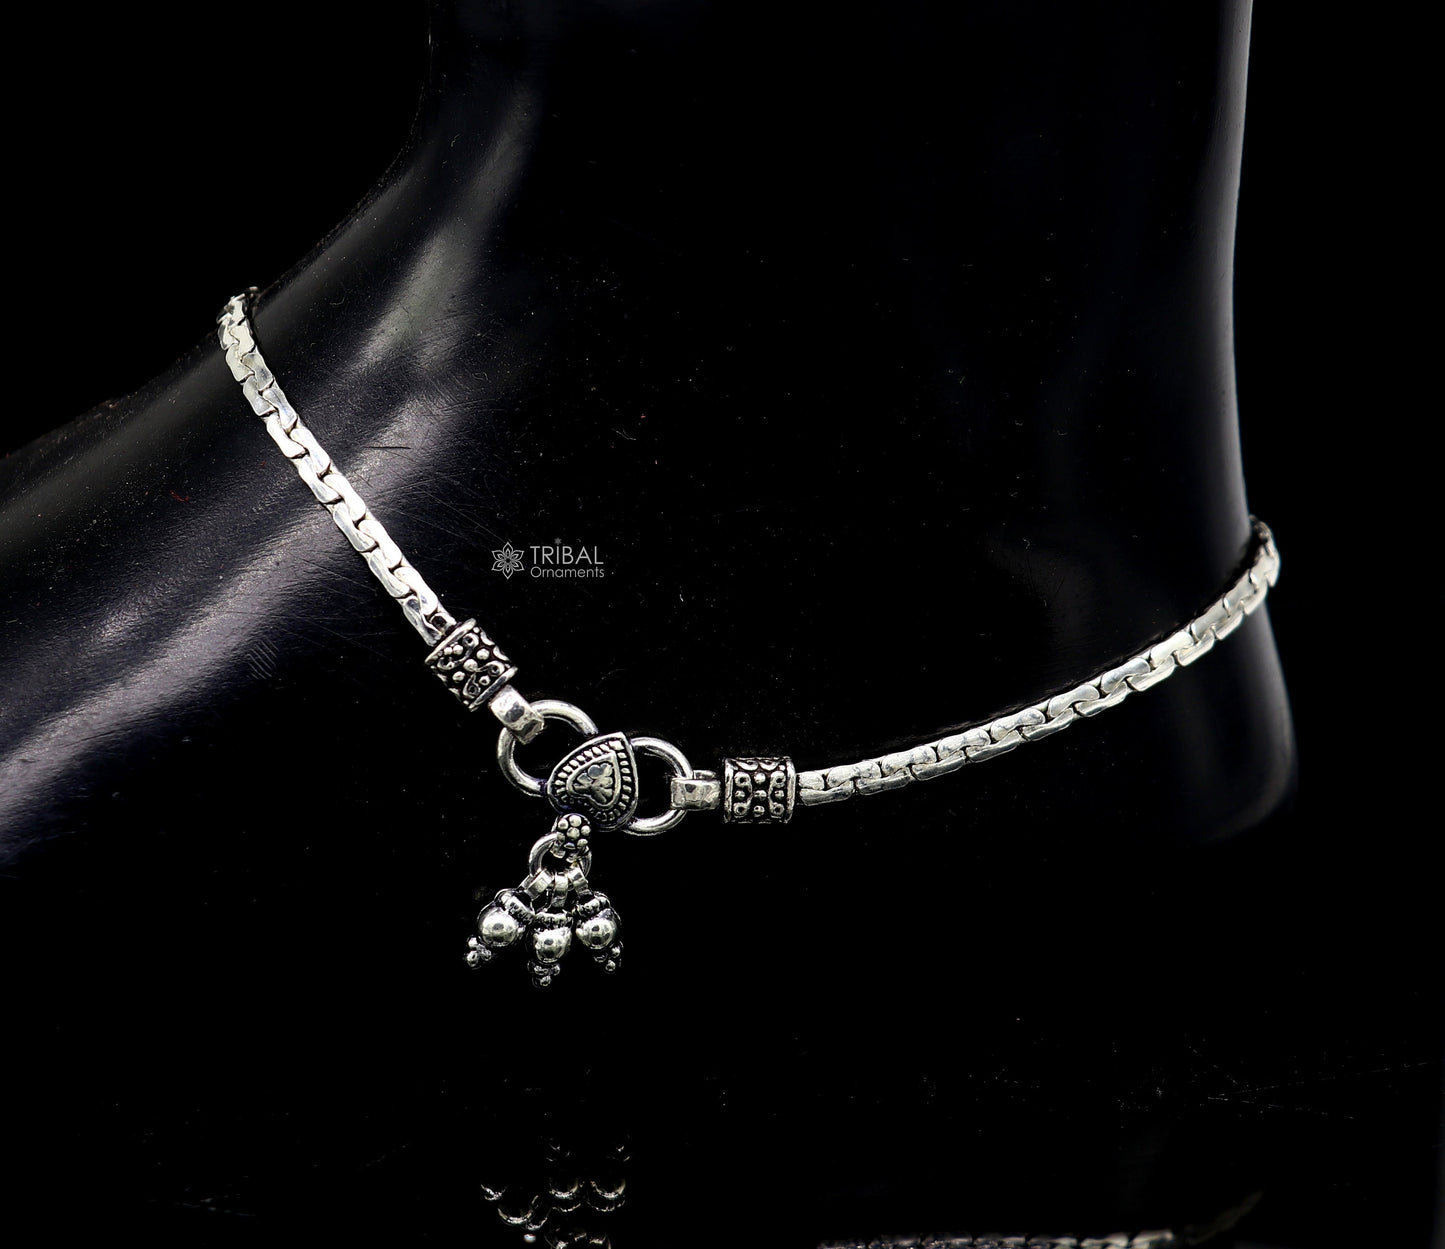 Handmade fabulous unique chain 925 sterling silver ankle bracelet, silver anklets, foot bracelet amazing belly dance jewelry gift her ank603 - TRIBAL ORNAMENTS